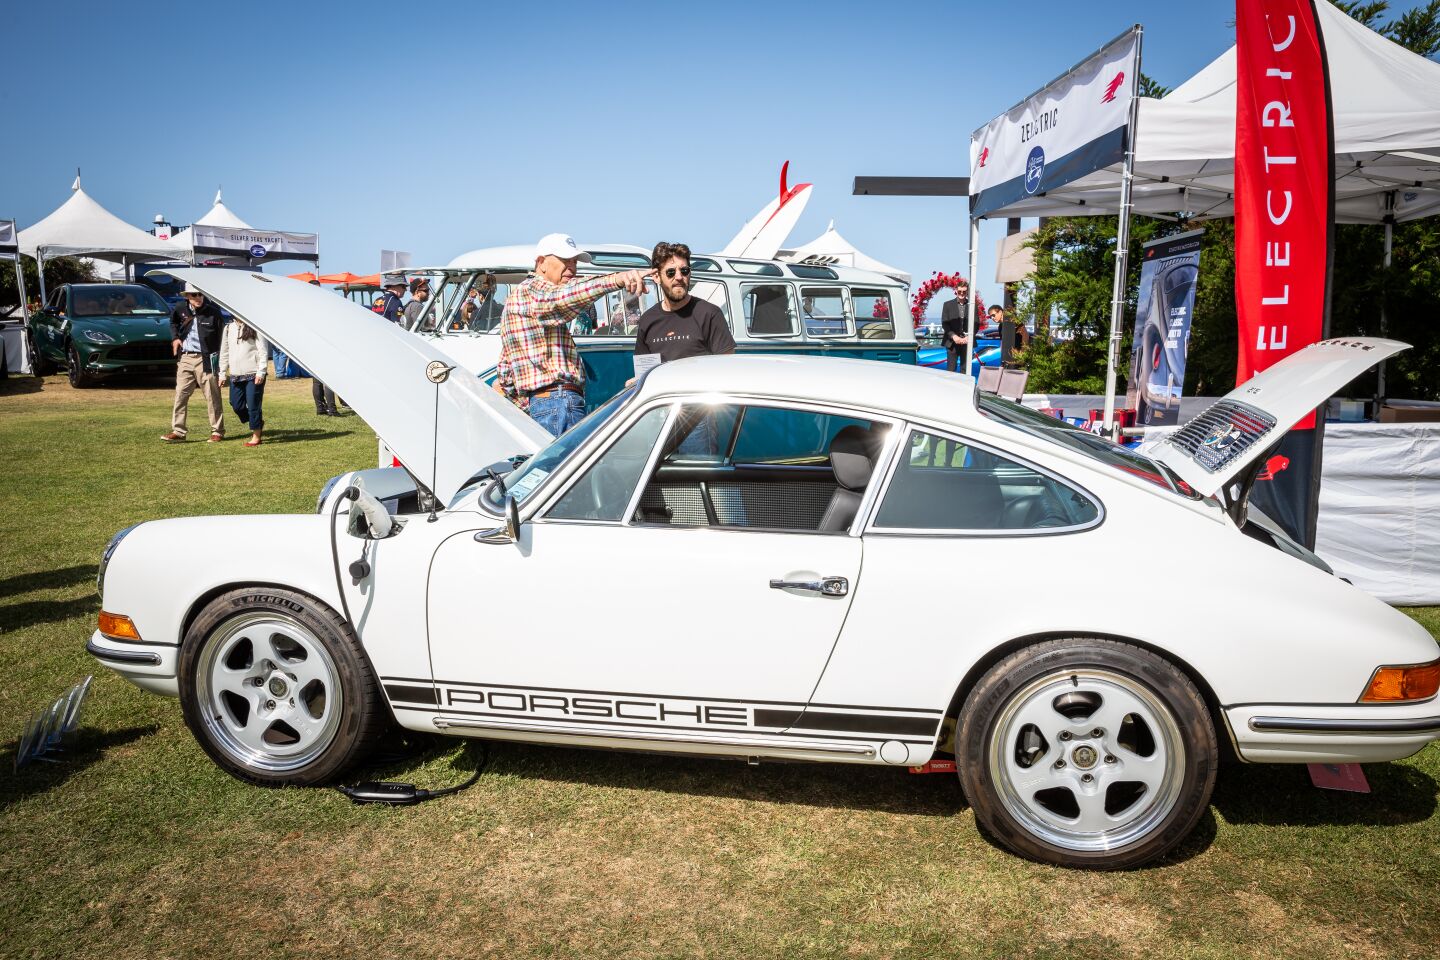 Aaron Weiss (left) and Zelectric's Robert McCarthy talk next to a converted electric 1969 Porsche 912 Restomod.